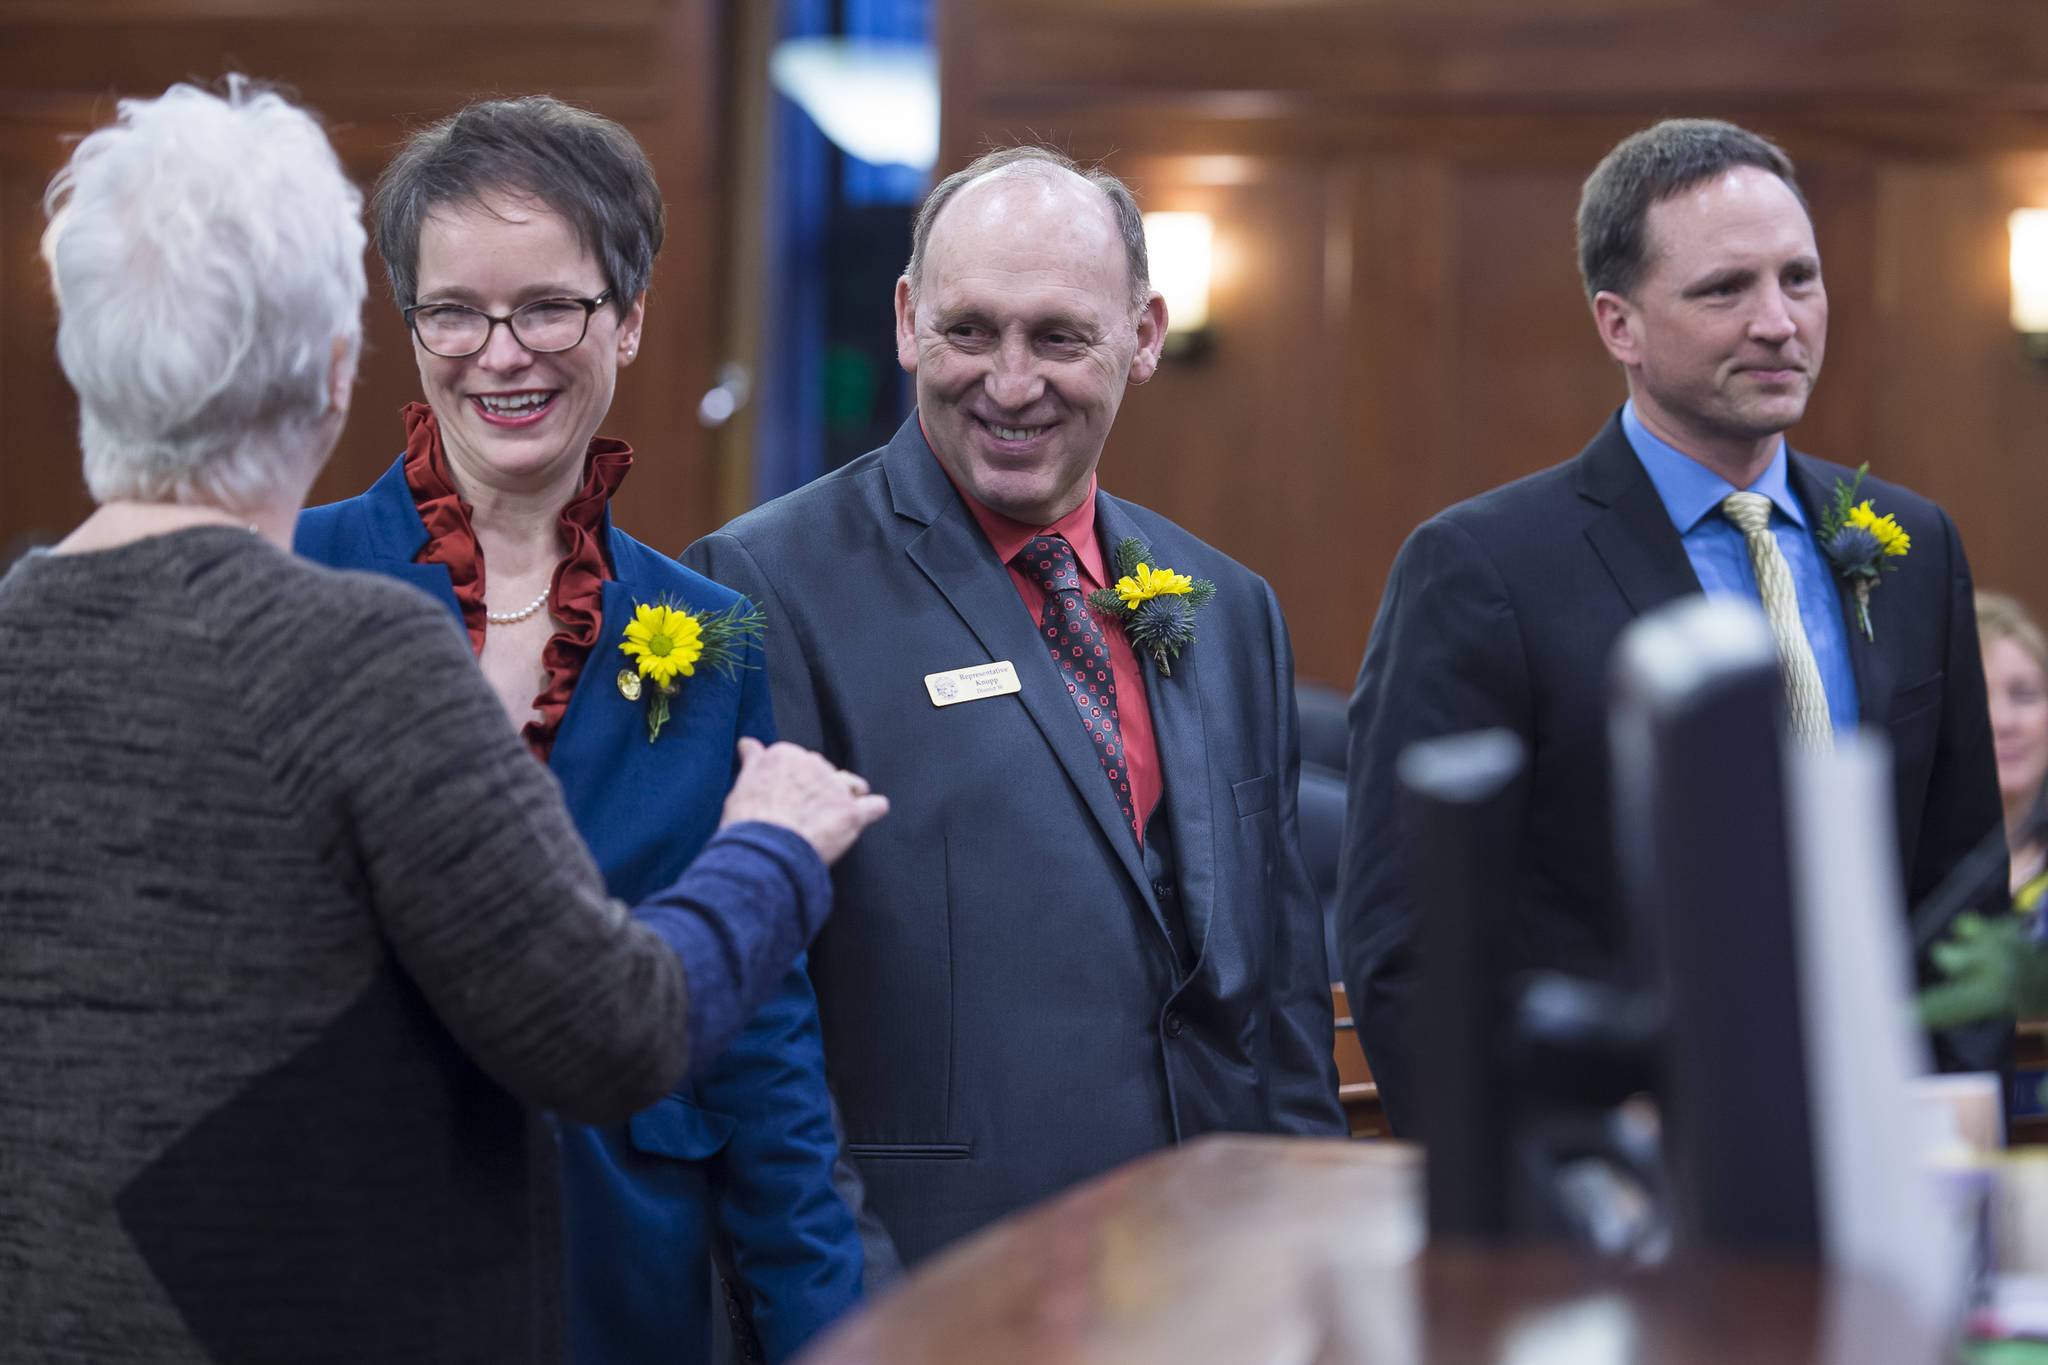 Rep. Louise Stutes, R-Kodiak, left, congratulates Rep. Sarah Vance, R-Homer, Rep. Gary Knopp, R-Kenai, and Rep. Ben Carpenter, R-Nikiski, right, after being sworn in on the opening day of the 31st Session of the Alaska Legislature on Tuesday. (Michael Penn | Juneau Empire)